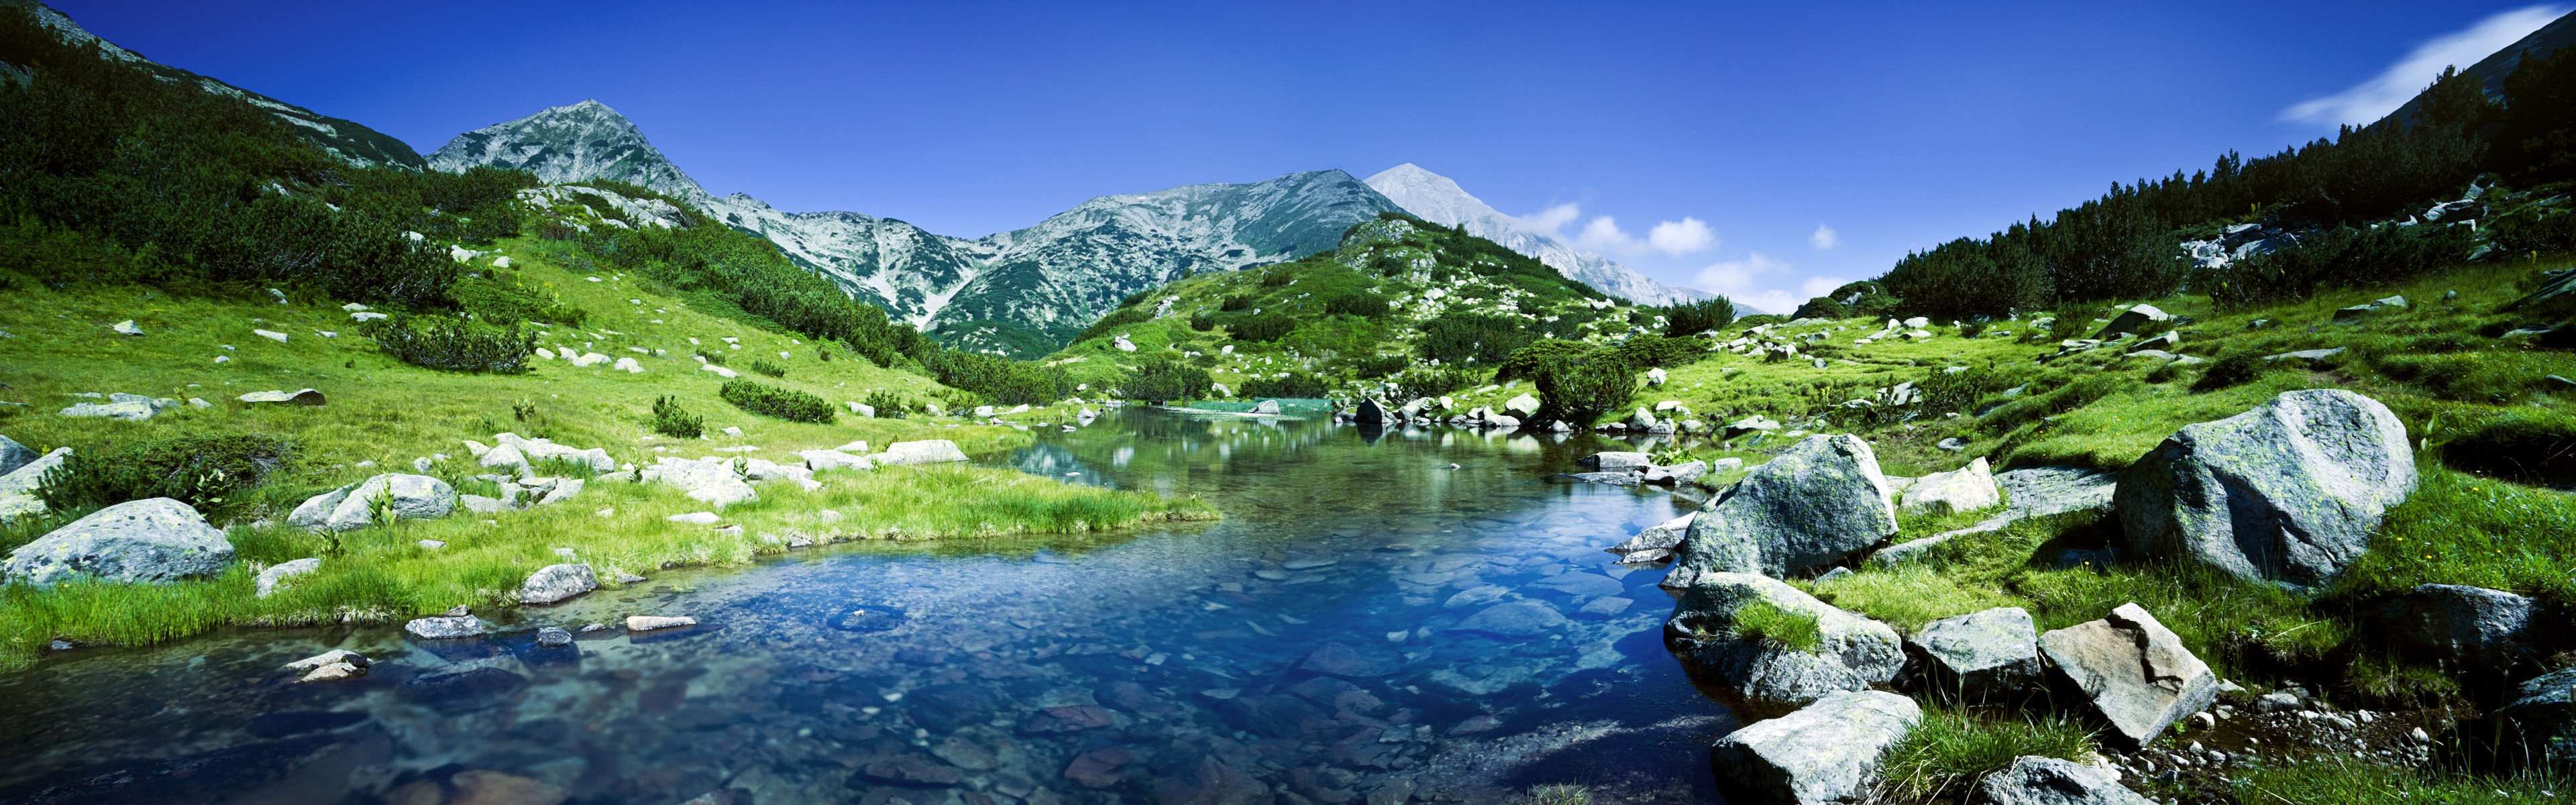 Windows 8 official panoramic wallpaper, waves, forests, majestic mountains #17 - 3840x1200